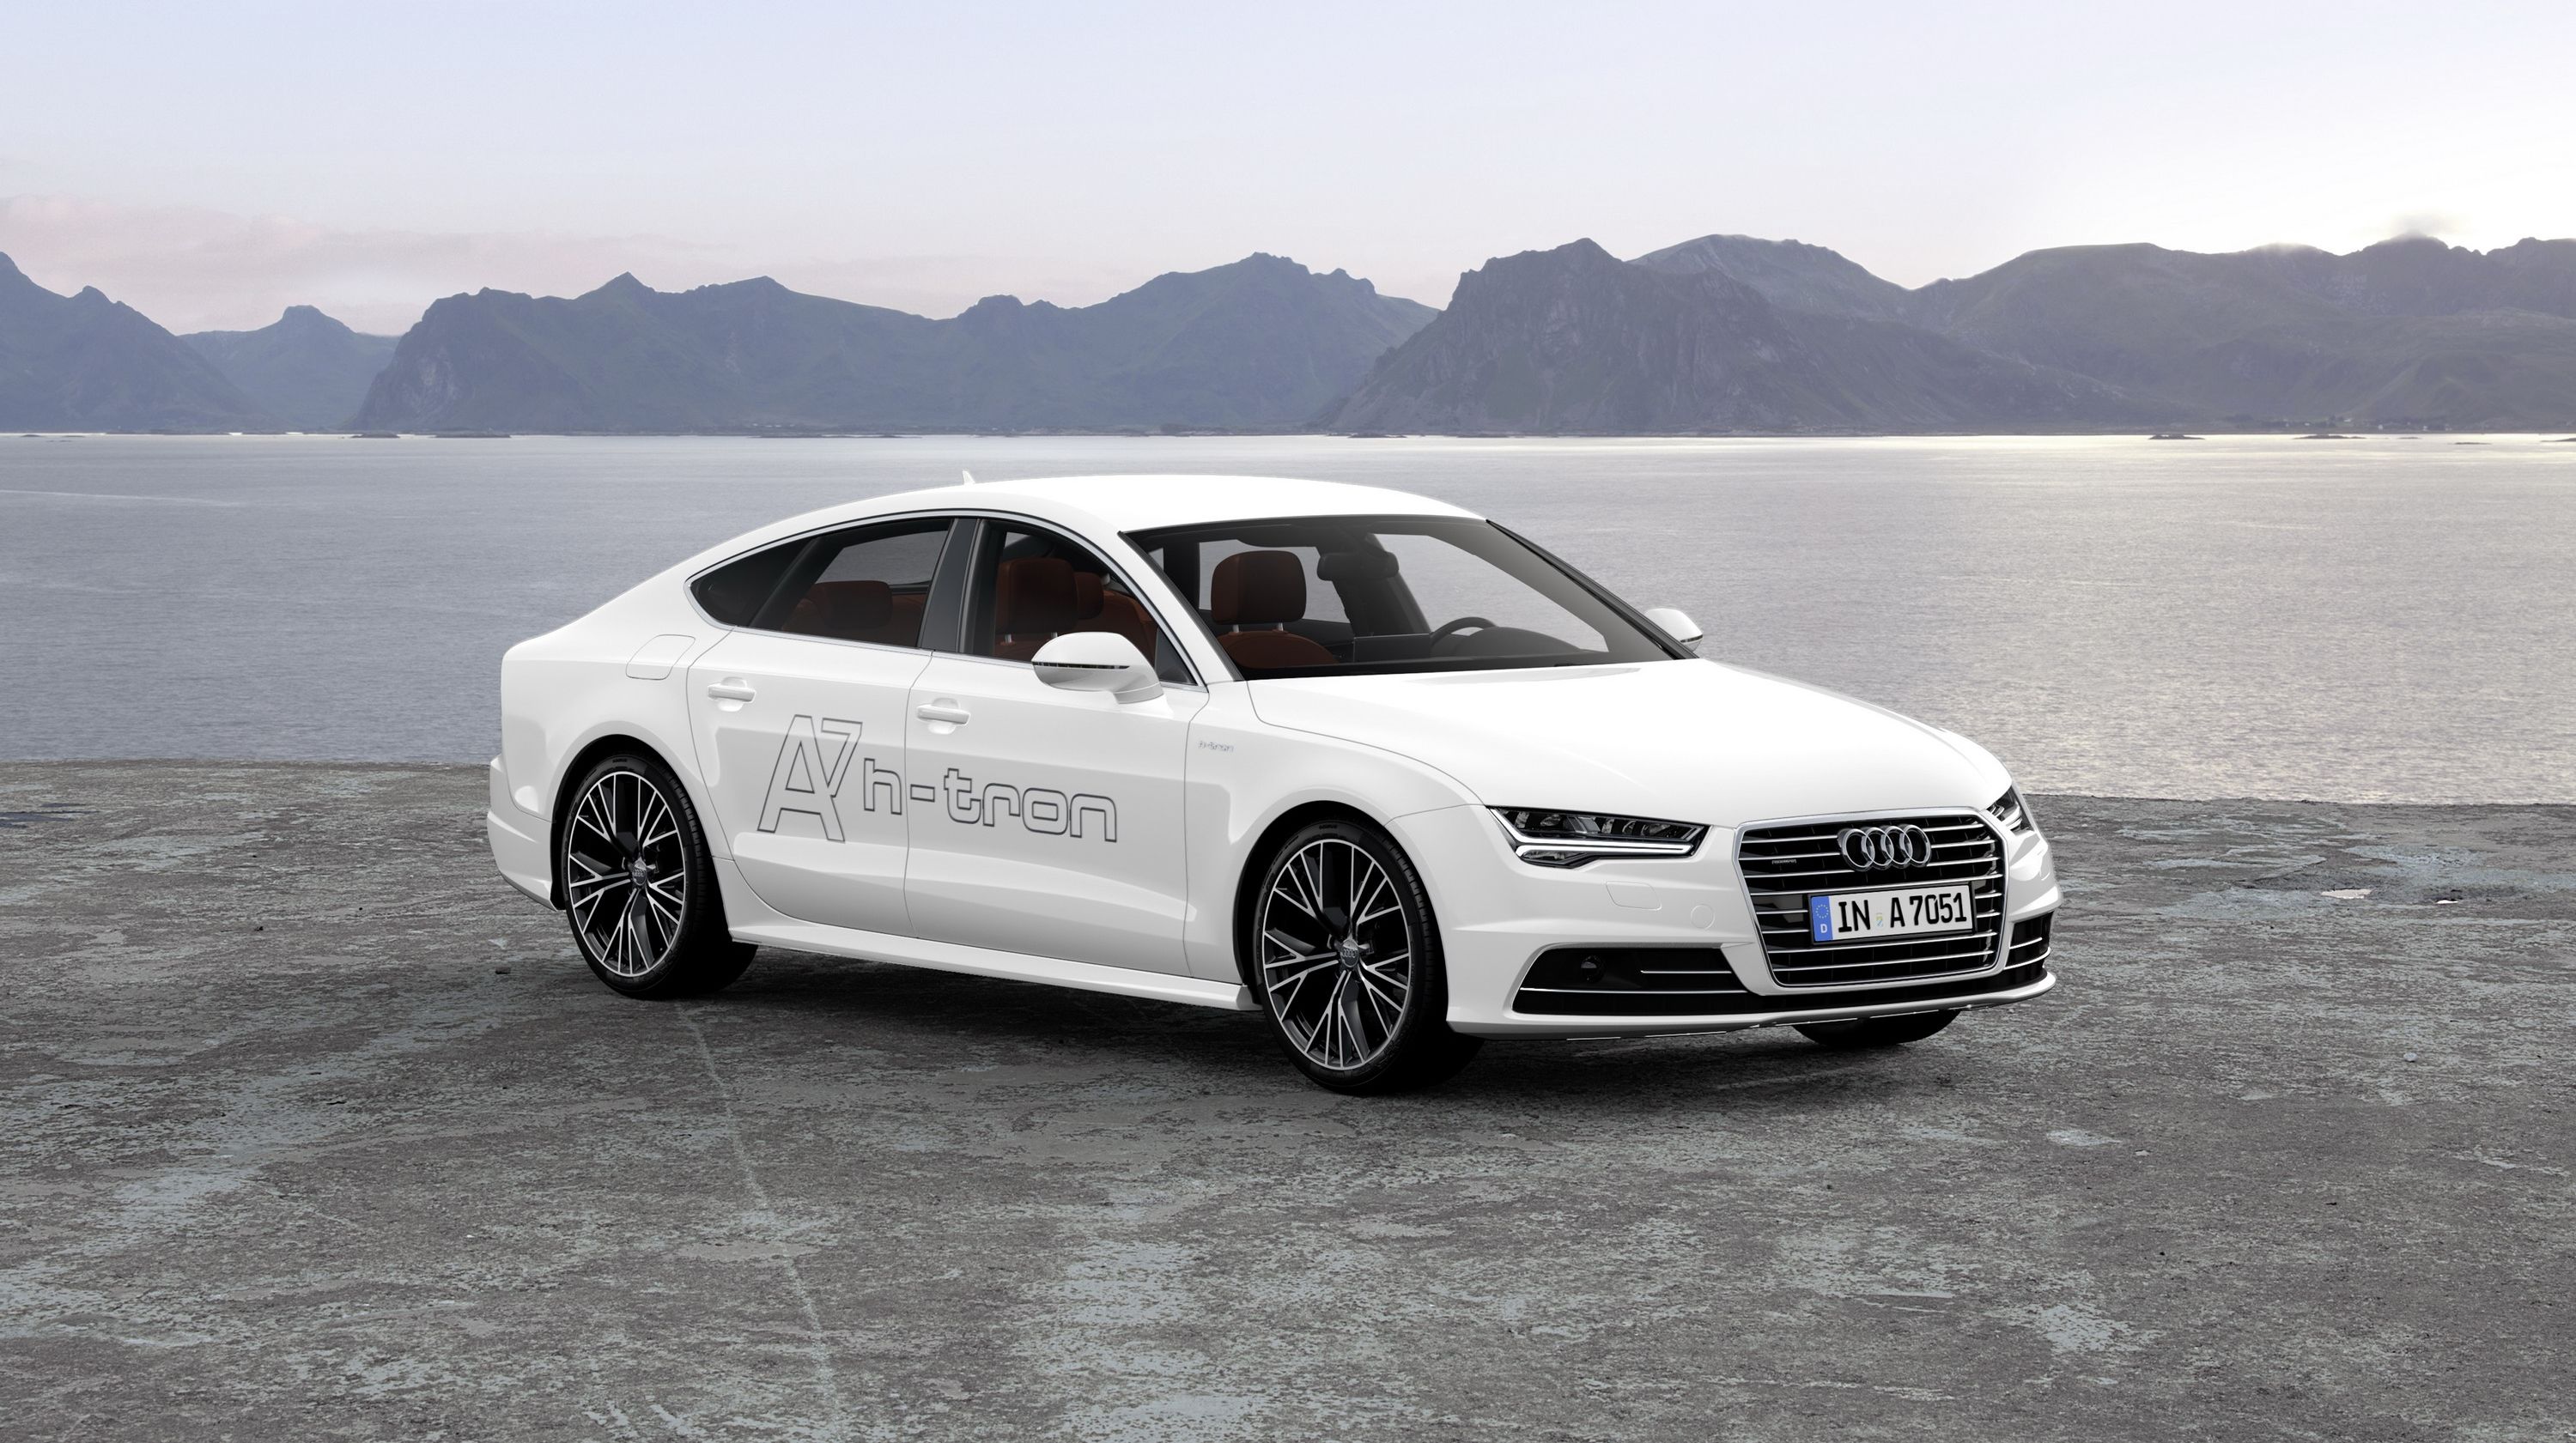  Audi has just gotten into the ydrogen game with its A7 h-tron concept. 